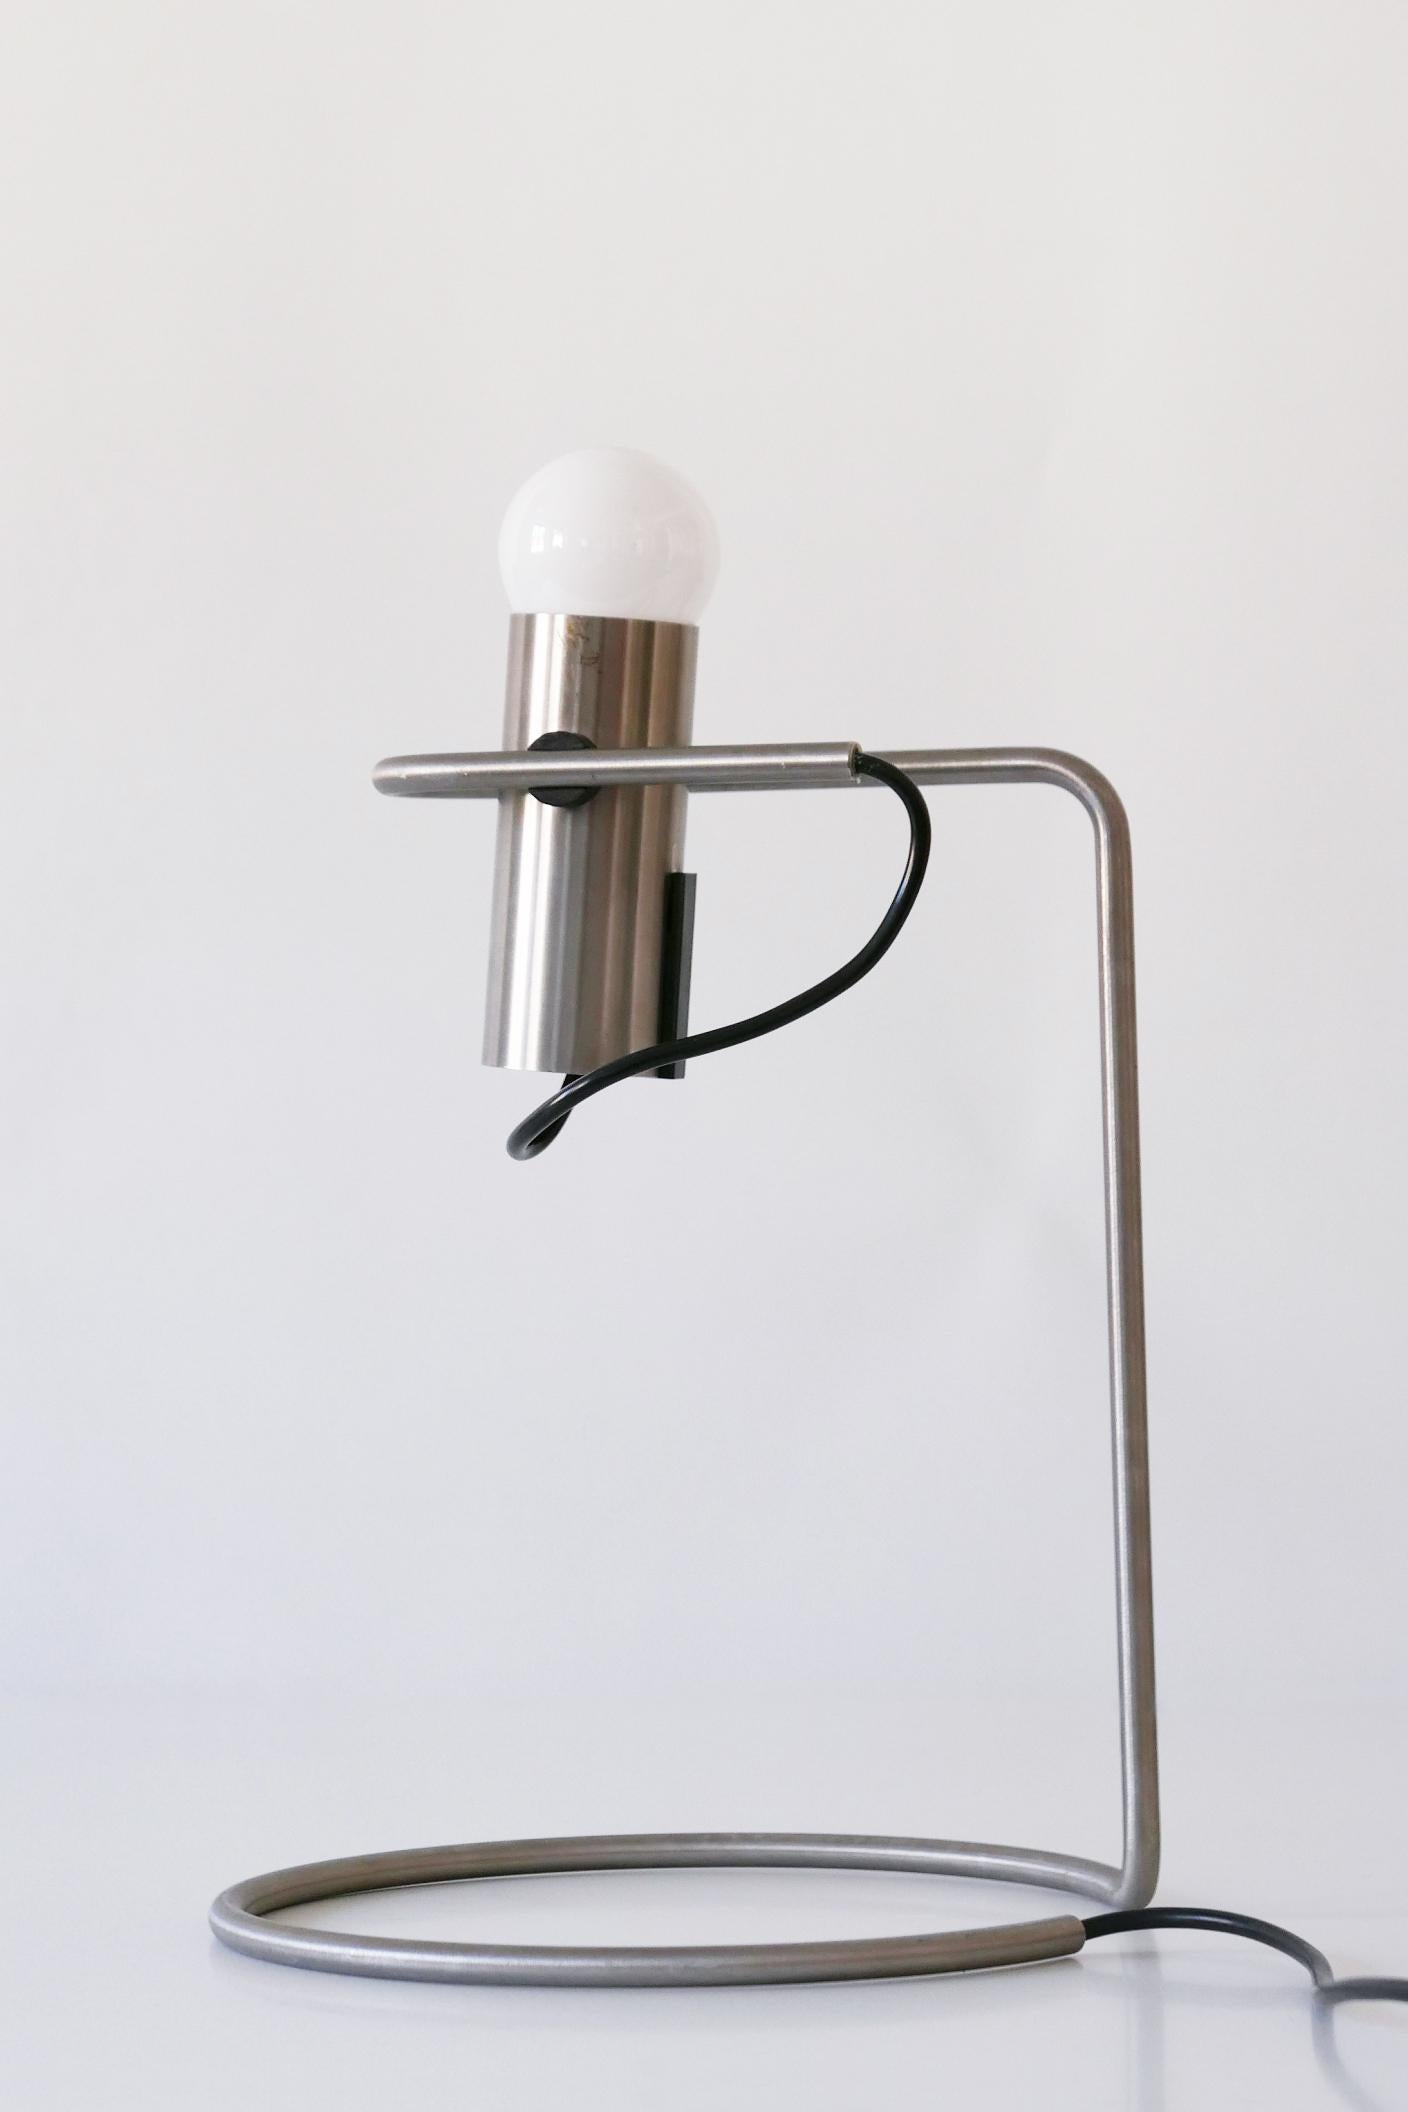 Exceptional Minimalistic Mid-Century Modern Table Lamp or Desk Light, 1960s For Sale 2